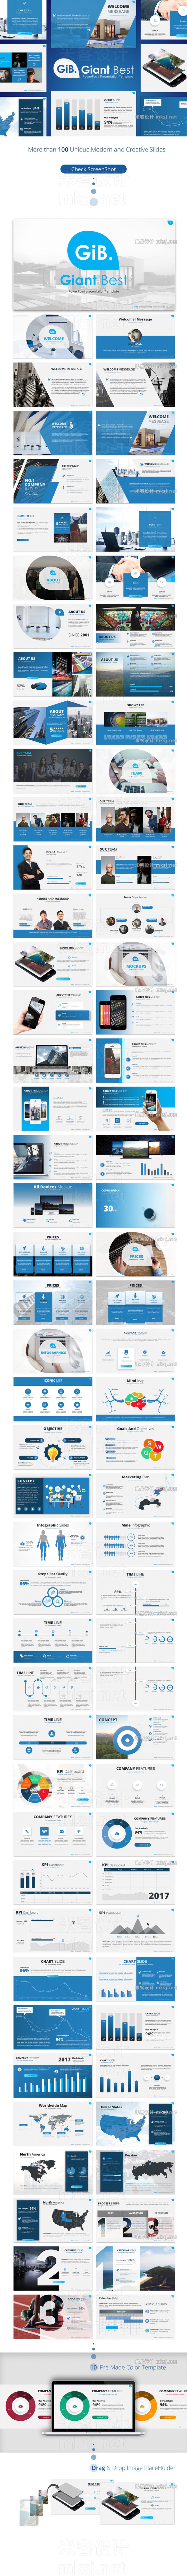 PPT模板 giant best powerpoint presentation template